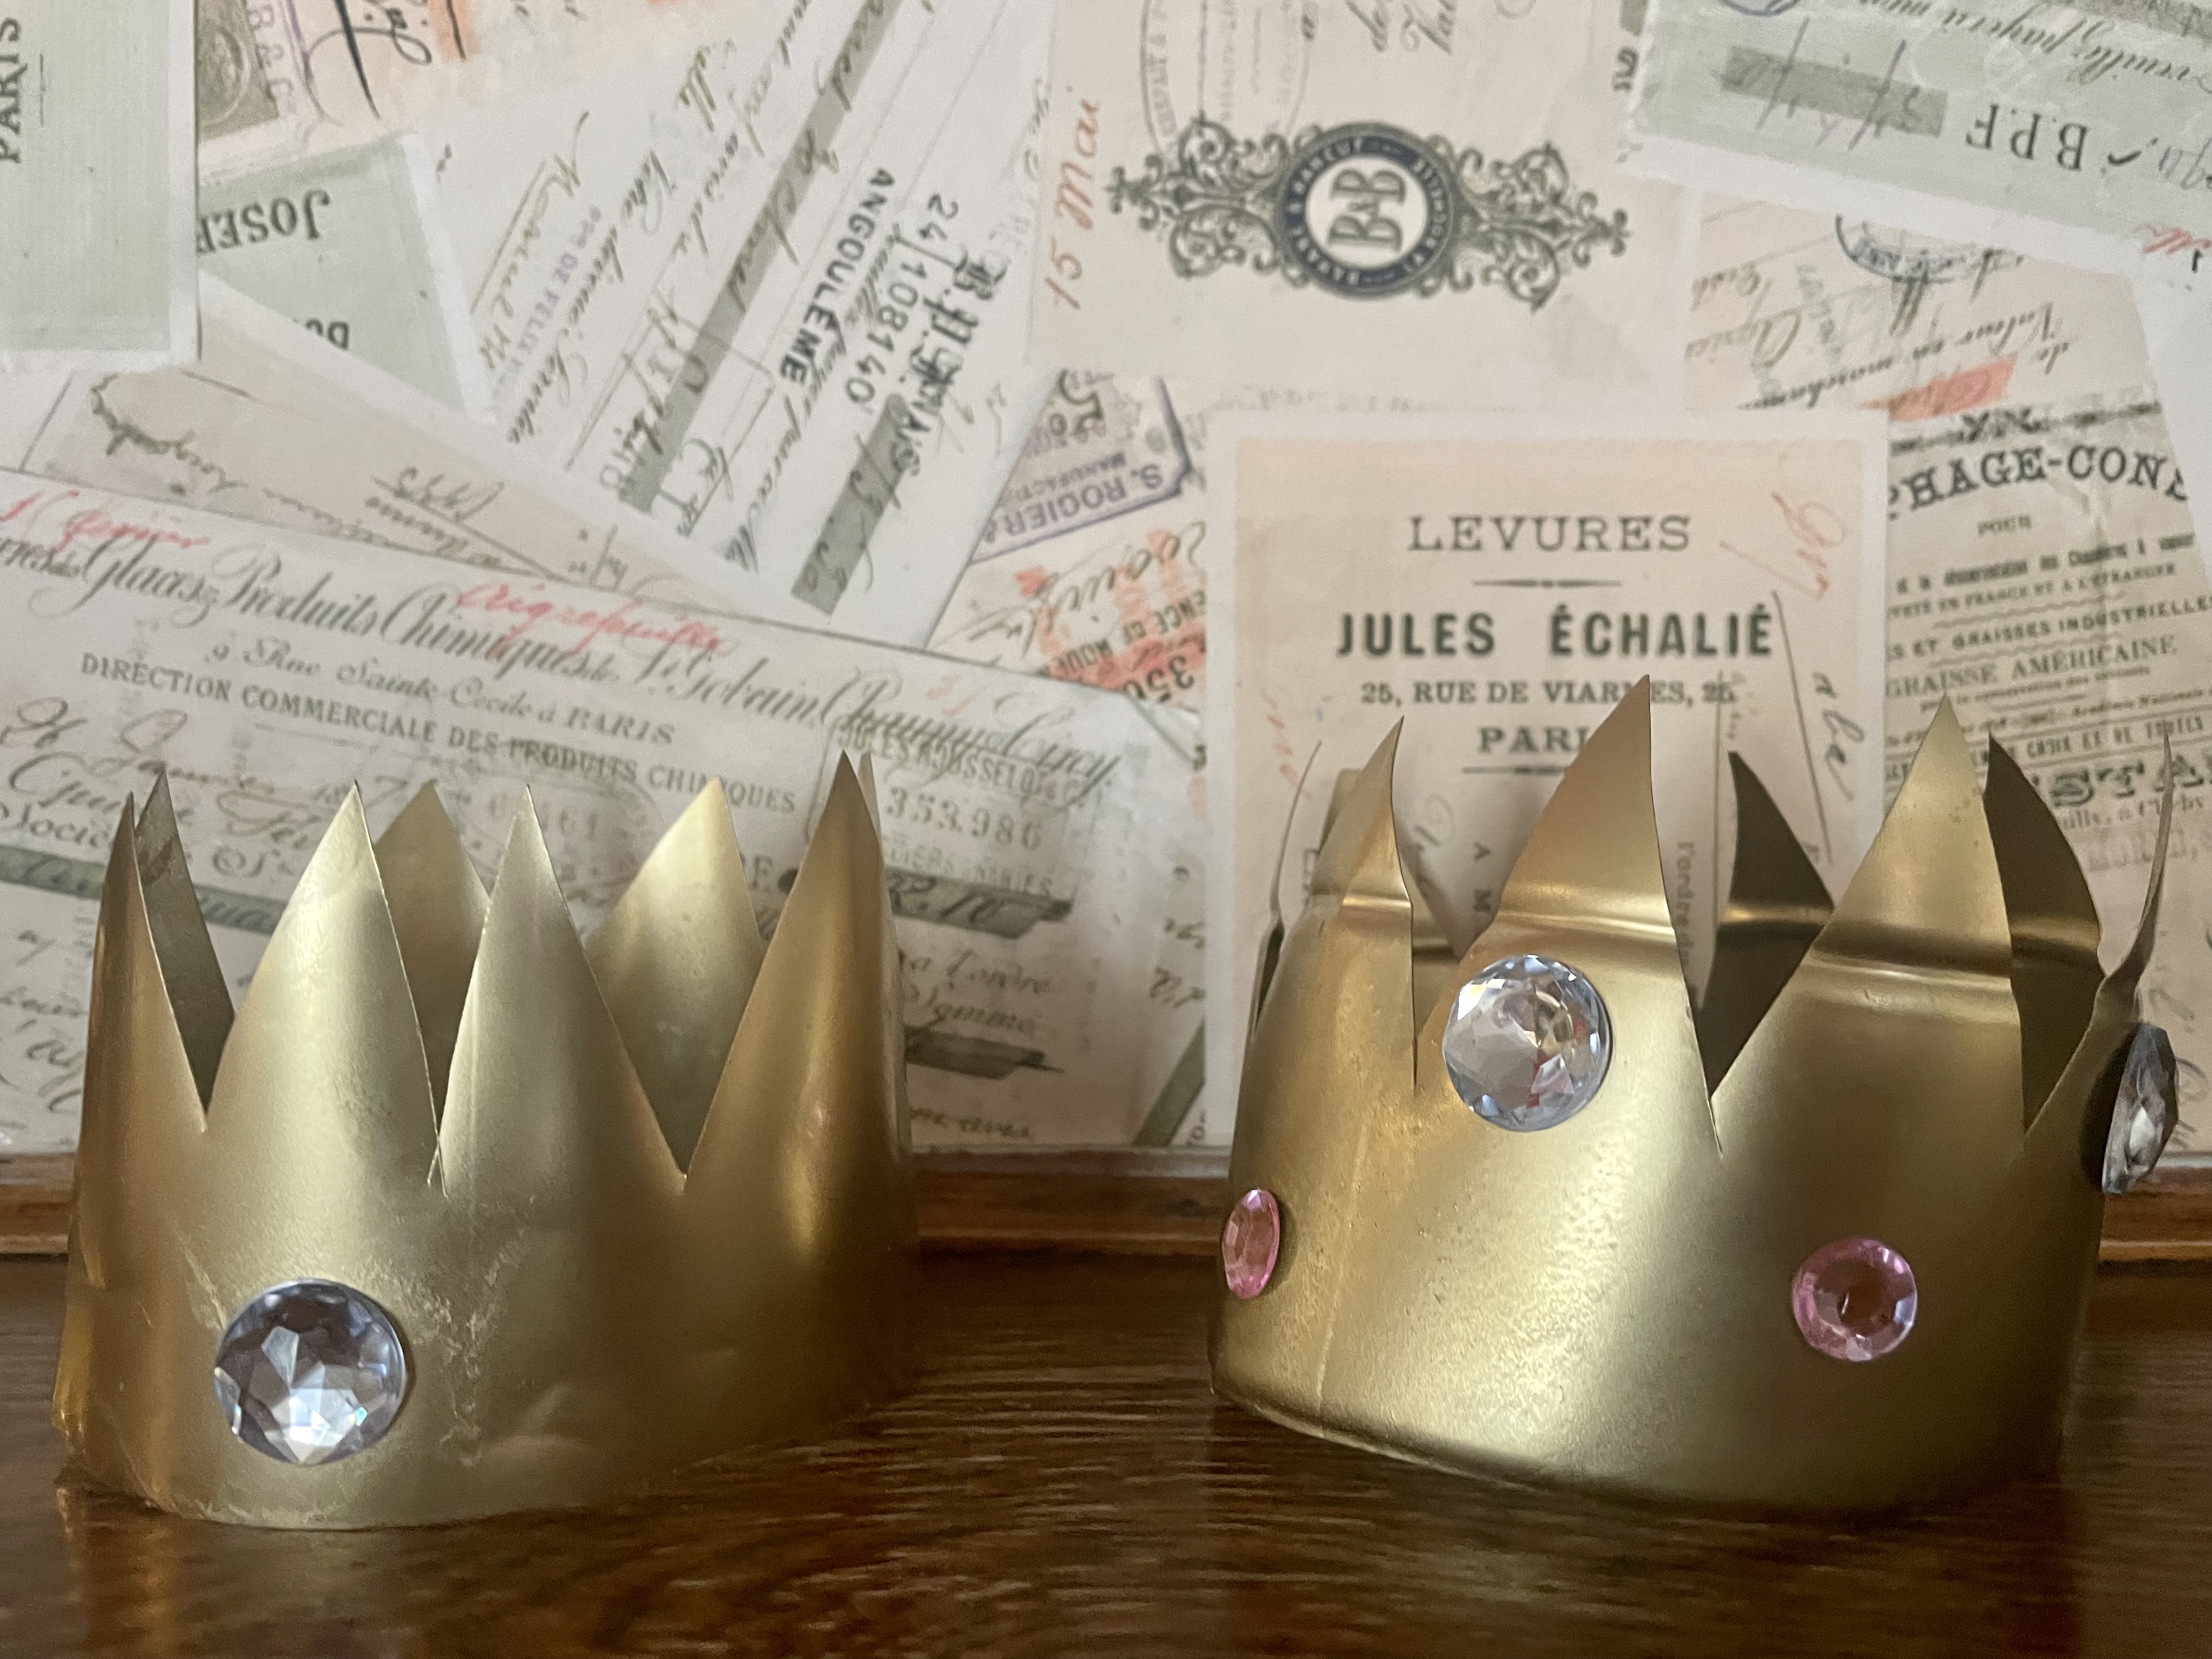 Above: Crowning glory – Jo’s upcycled pop bottle street decorations